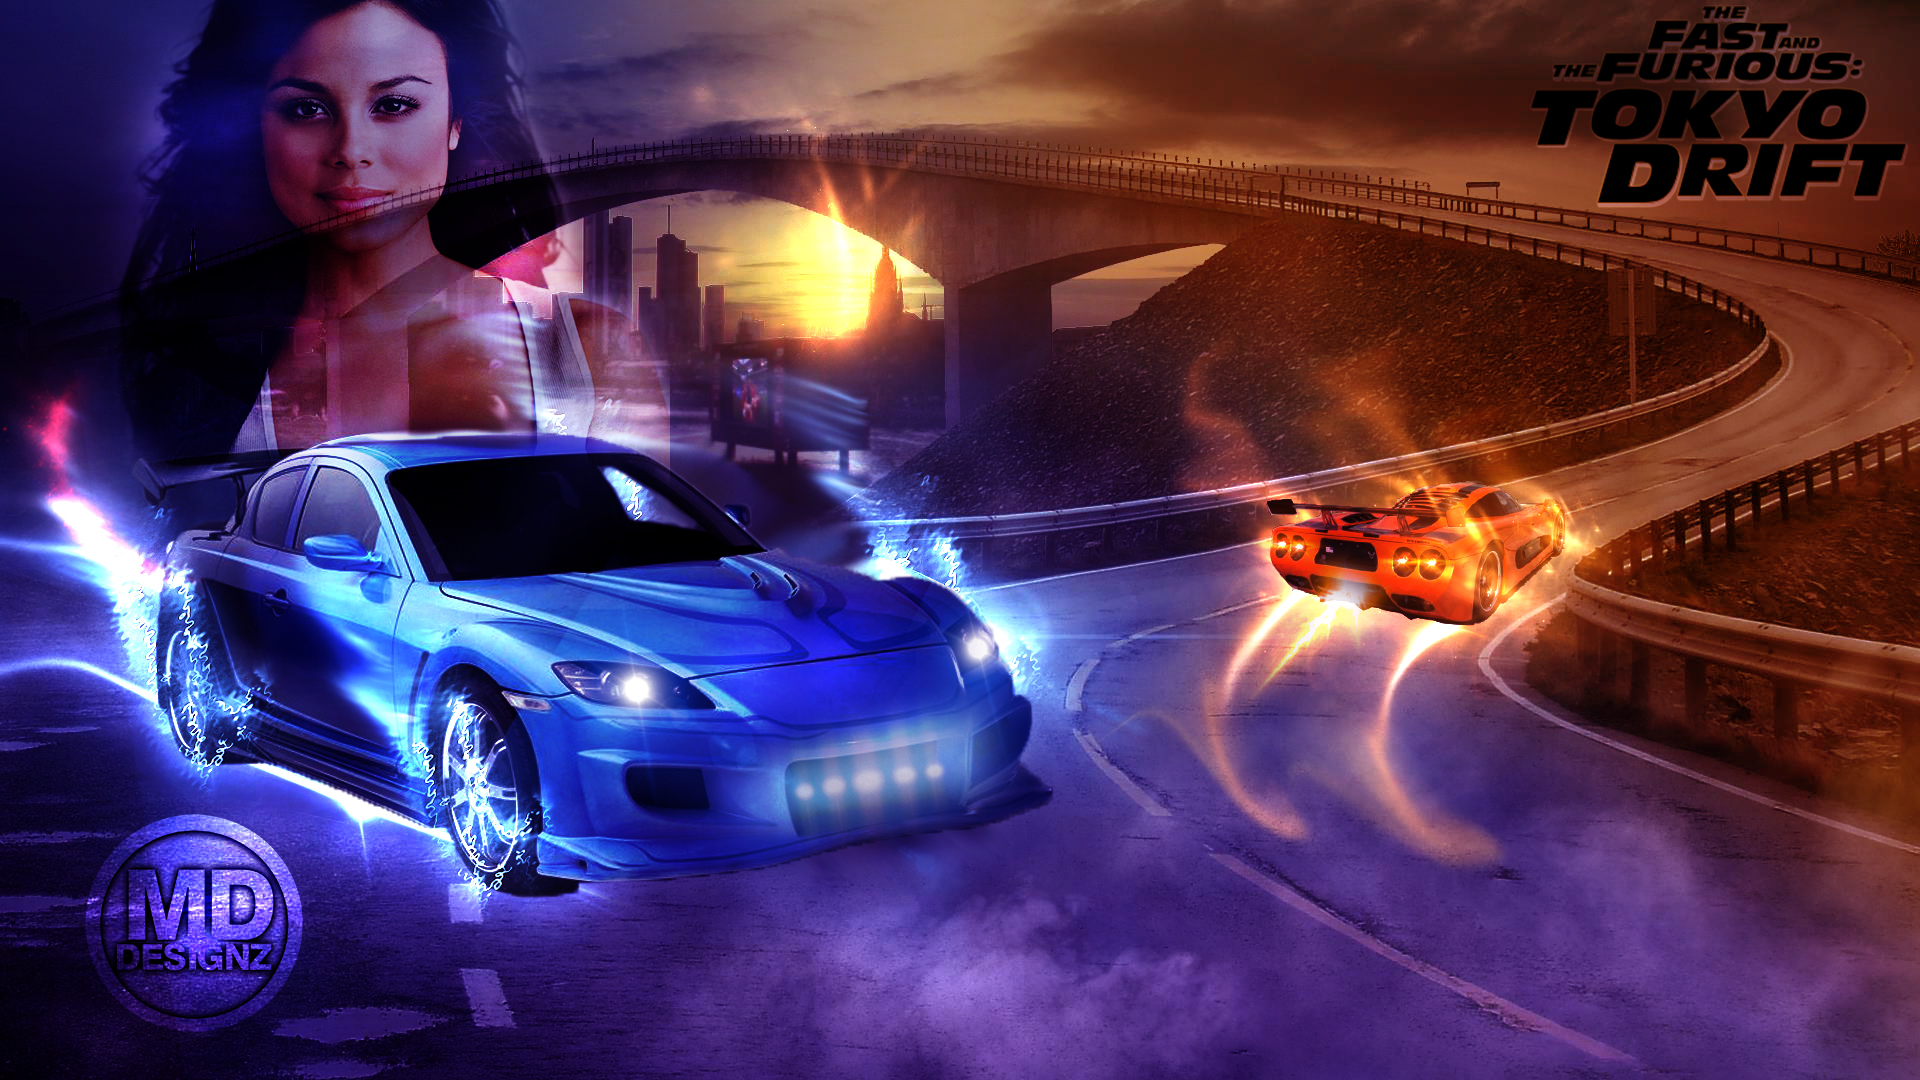   fast and the furious  tokyo drift wallpaper by mddesignz d5krmuojpg